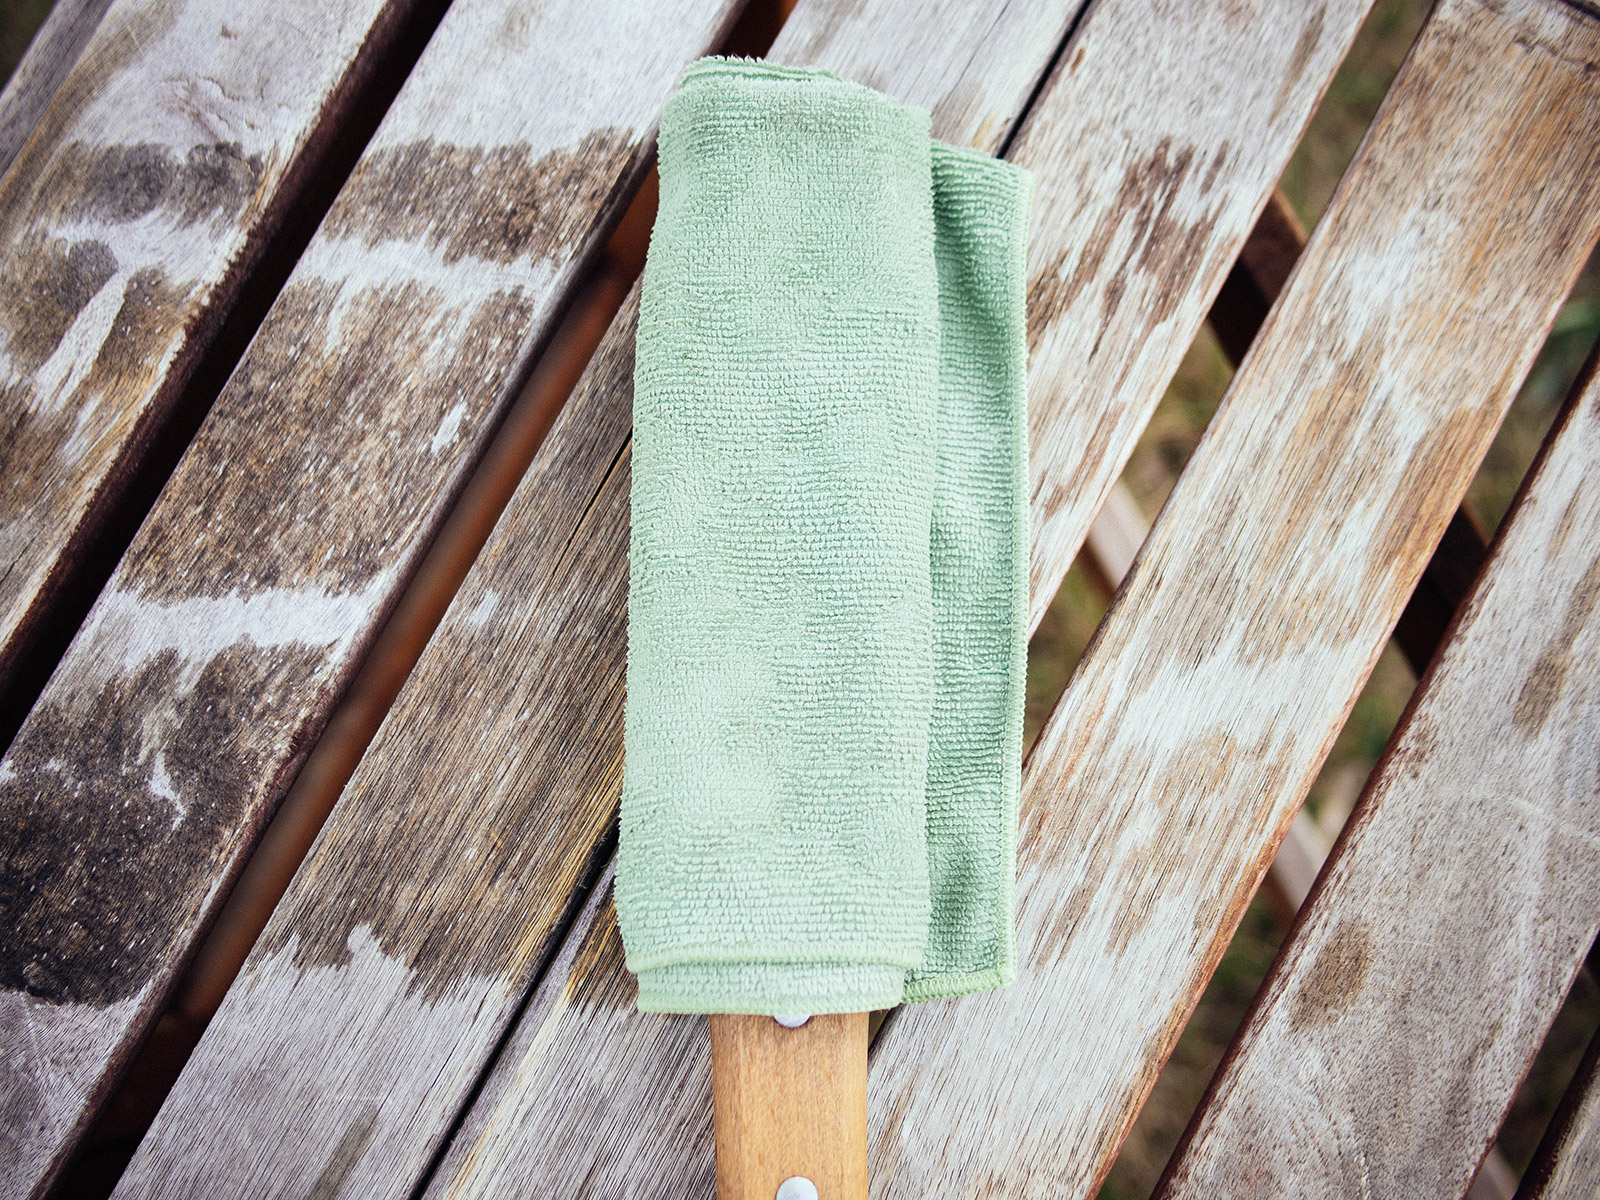 A garden tool wrapped in a vinegar-soaked green towel for rust removal